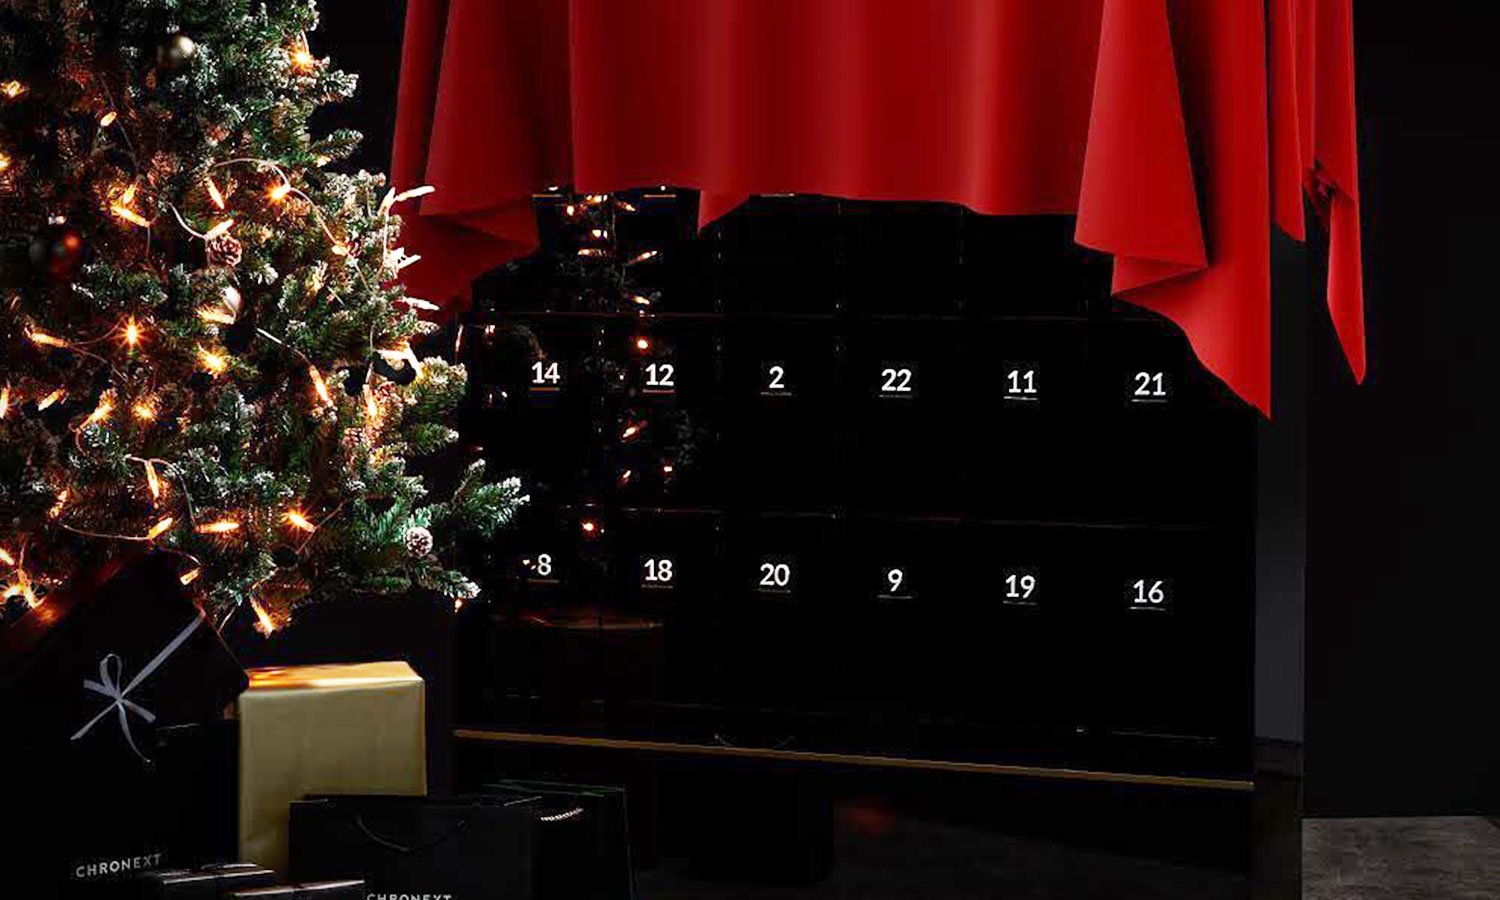 Most expensive advent calendar showcasing luxury watches worth 1.25 million